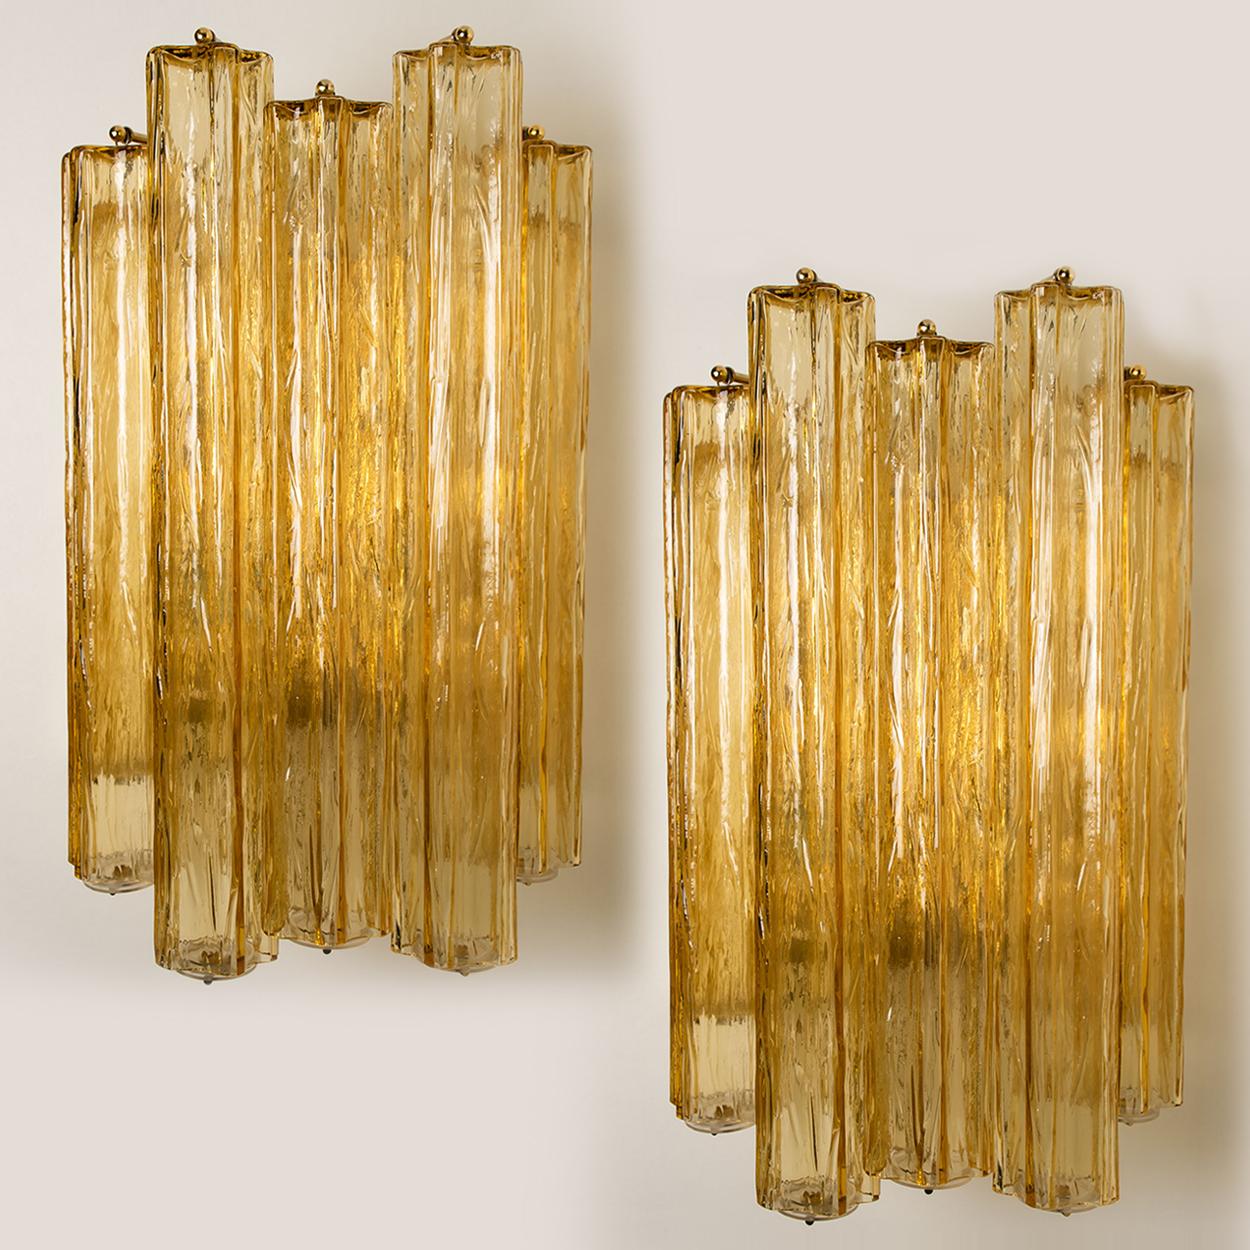 1 of the 3 Extra Large Wall Sconces or Wall Lights Murano Glass, Barovier & Toso 3